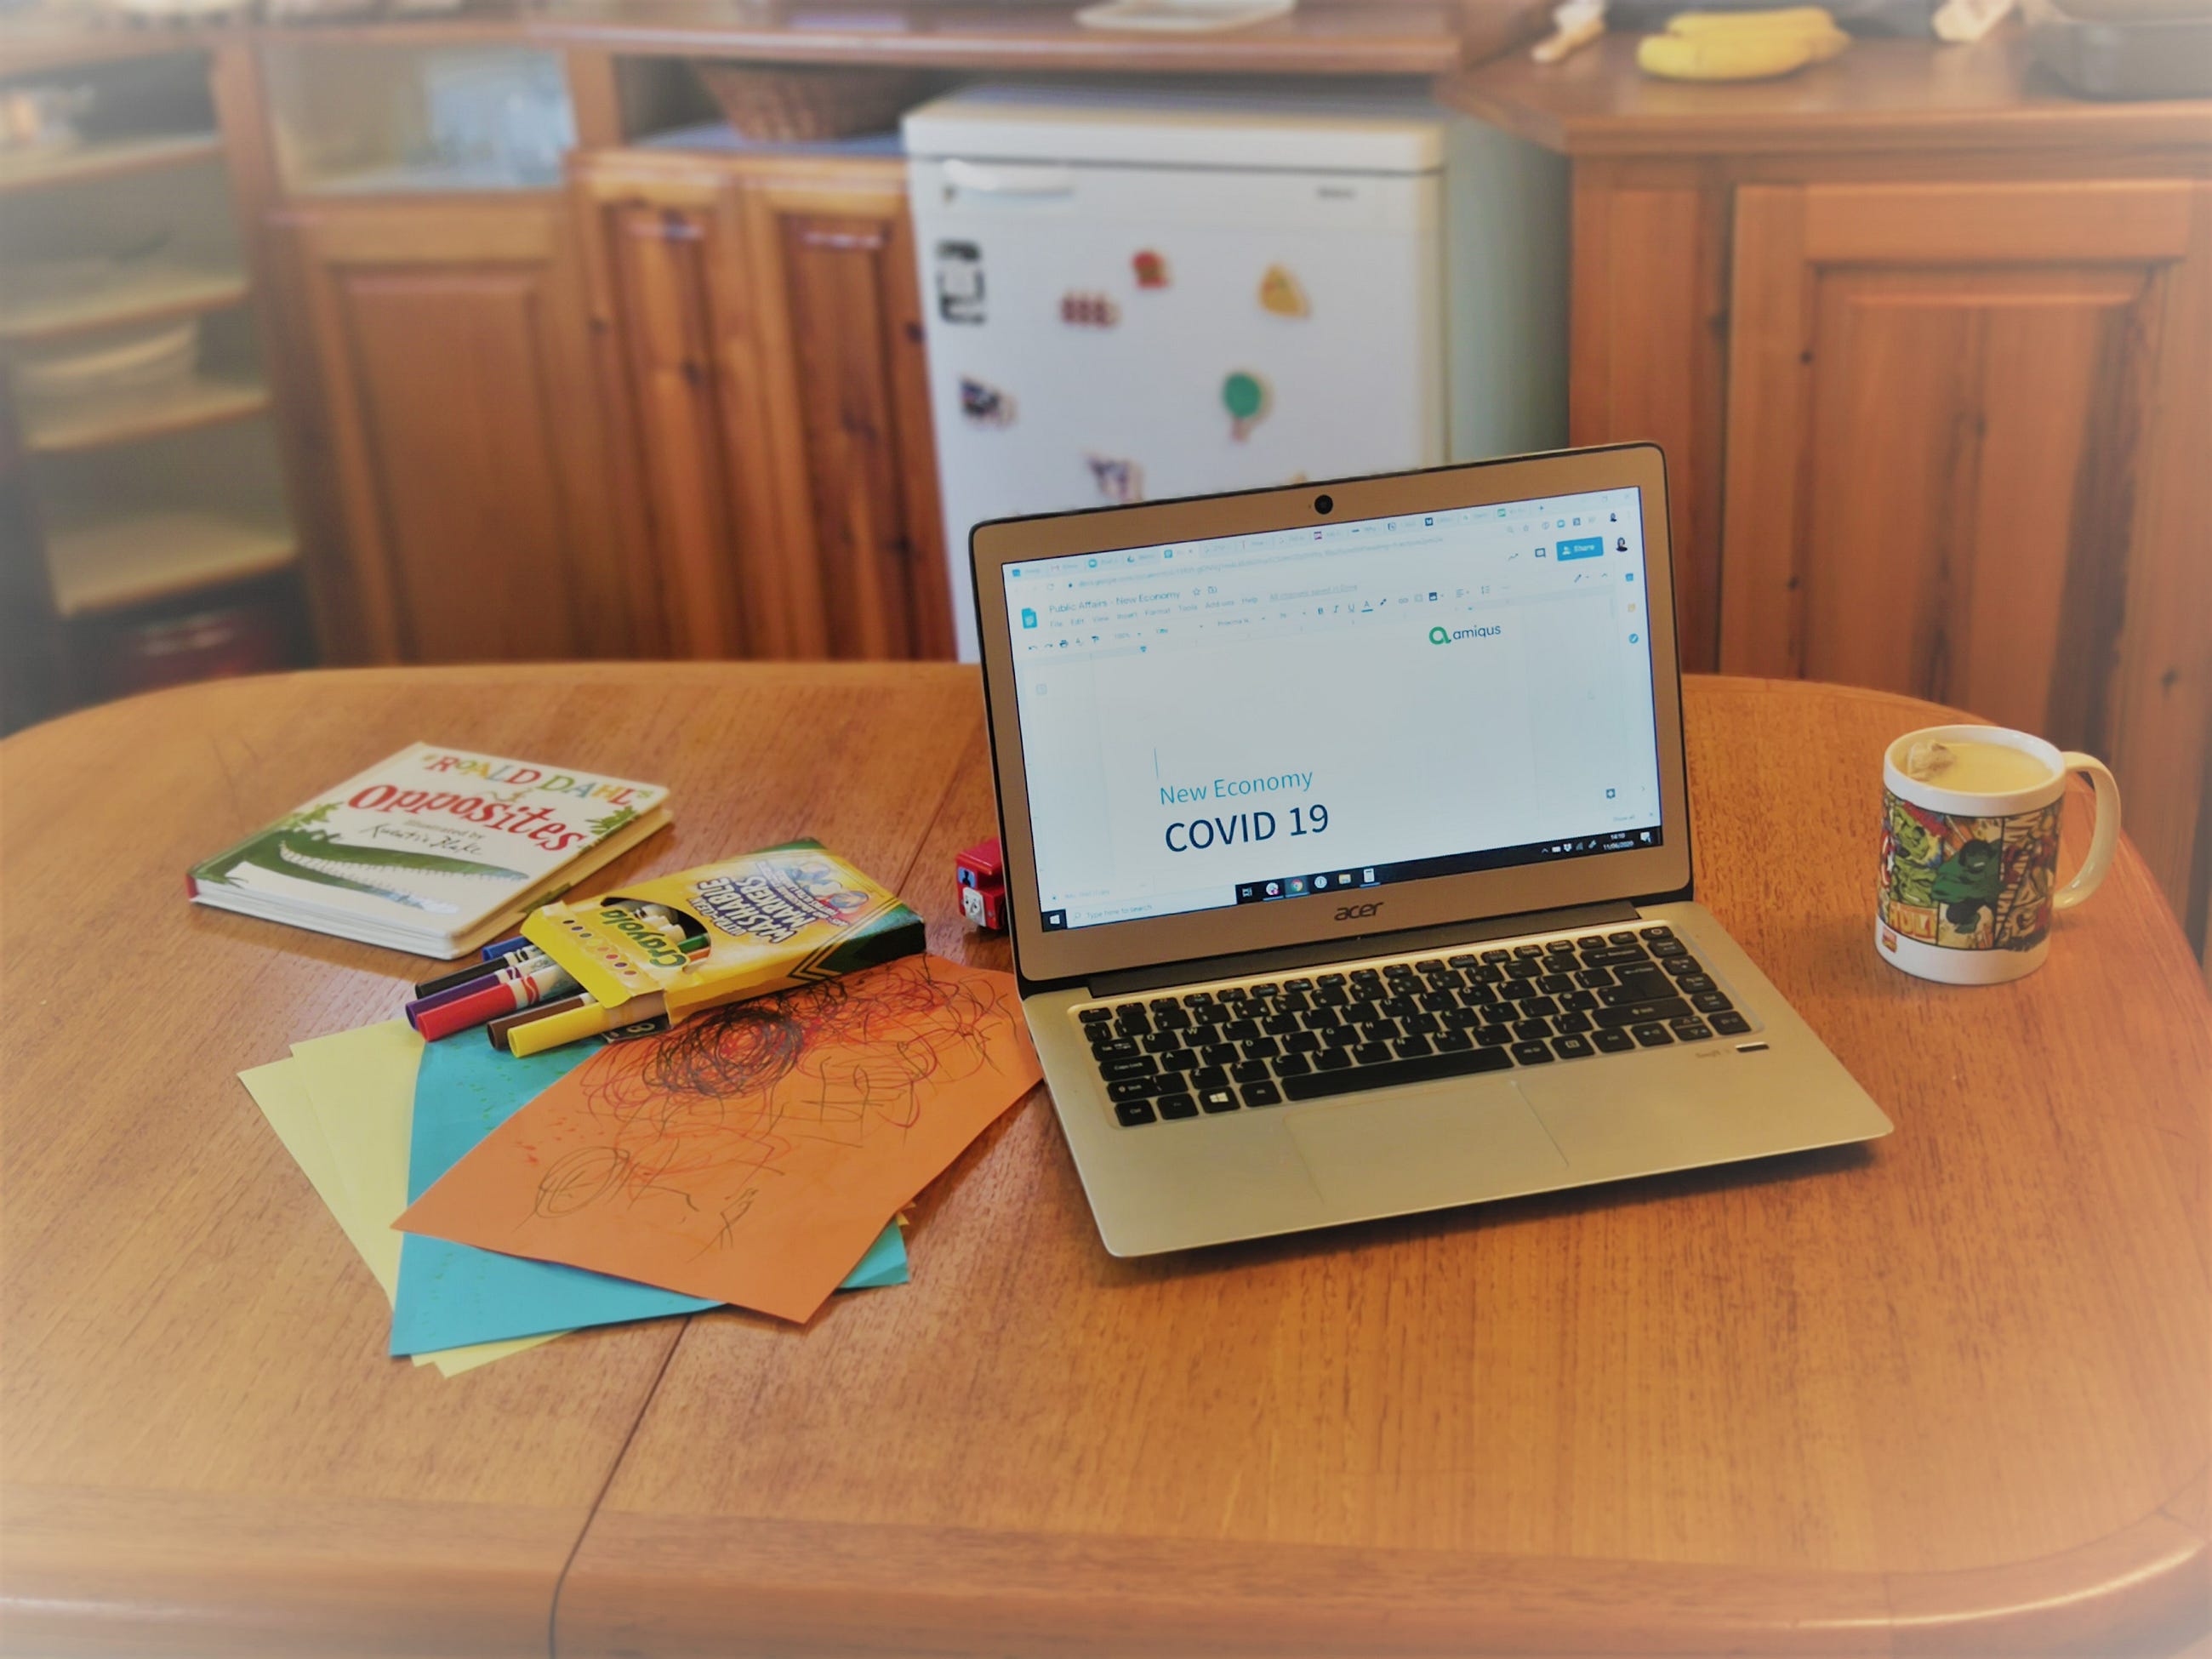 An image taken of an employees work desk with a laptop desktop screen showing a document stating 'New Economy COVID-19'